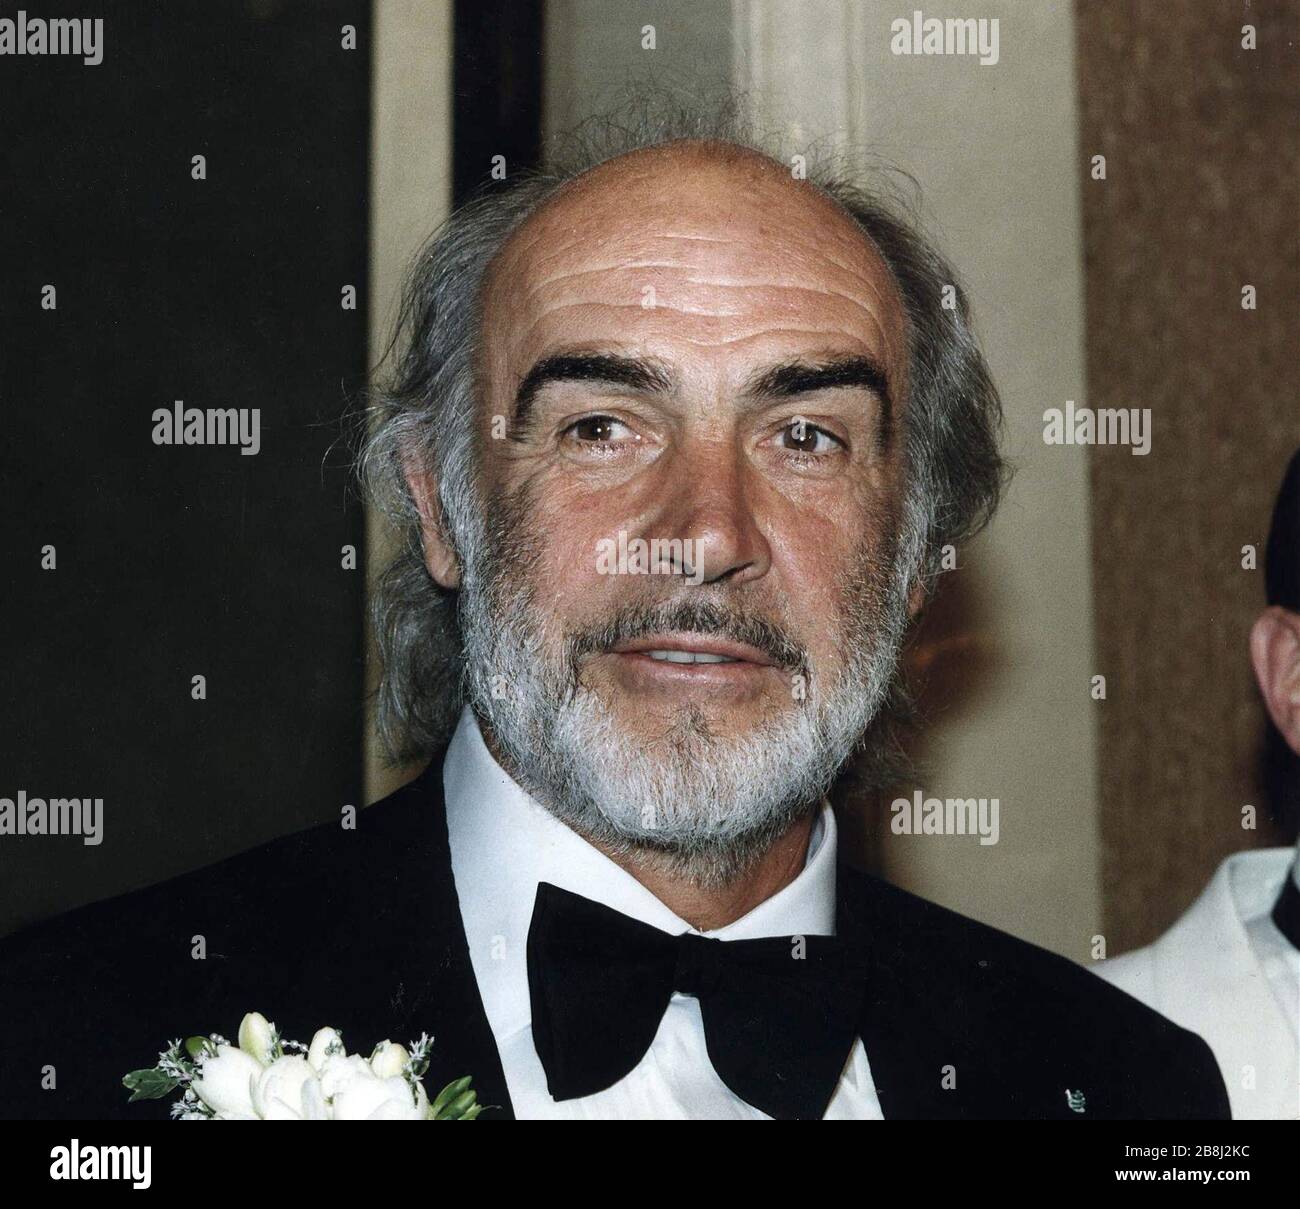 Legendary Scottish film actor Sir Sean Connery, pictured at the Edinburgh Press Club during a function to honour his work in the film industry. Connery was born in Edinburgh, Scotland and was an acclaimed Hollywood star who made his name playing the lead role in  a number of James Bond movies in the 1960s. He was a committed nationalist who donated large sums of money to the Scottish National Party. Stock Photo